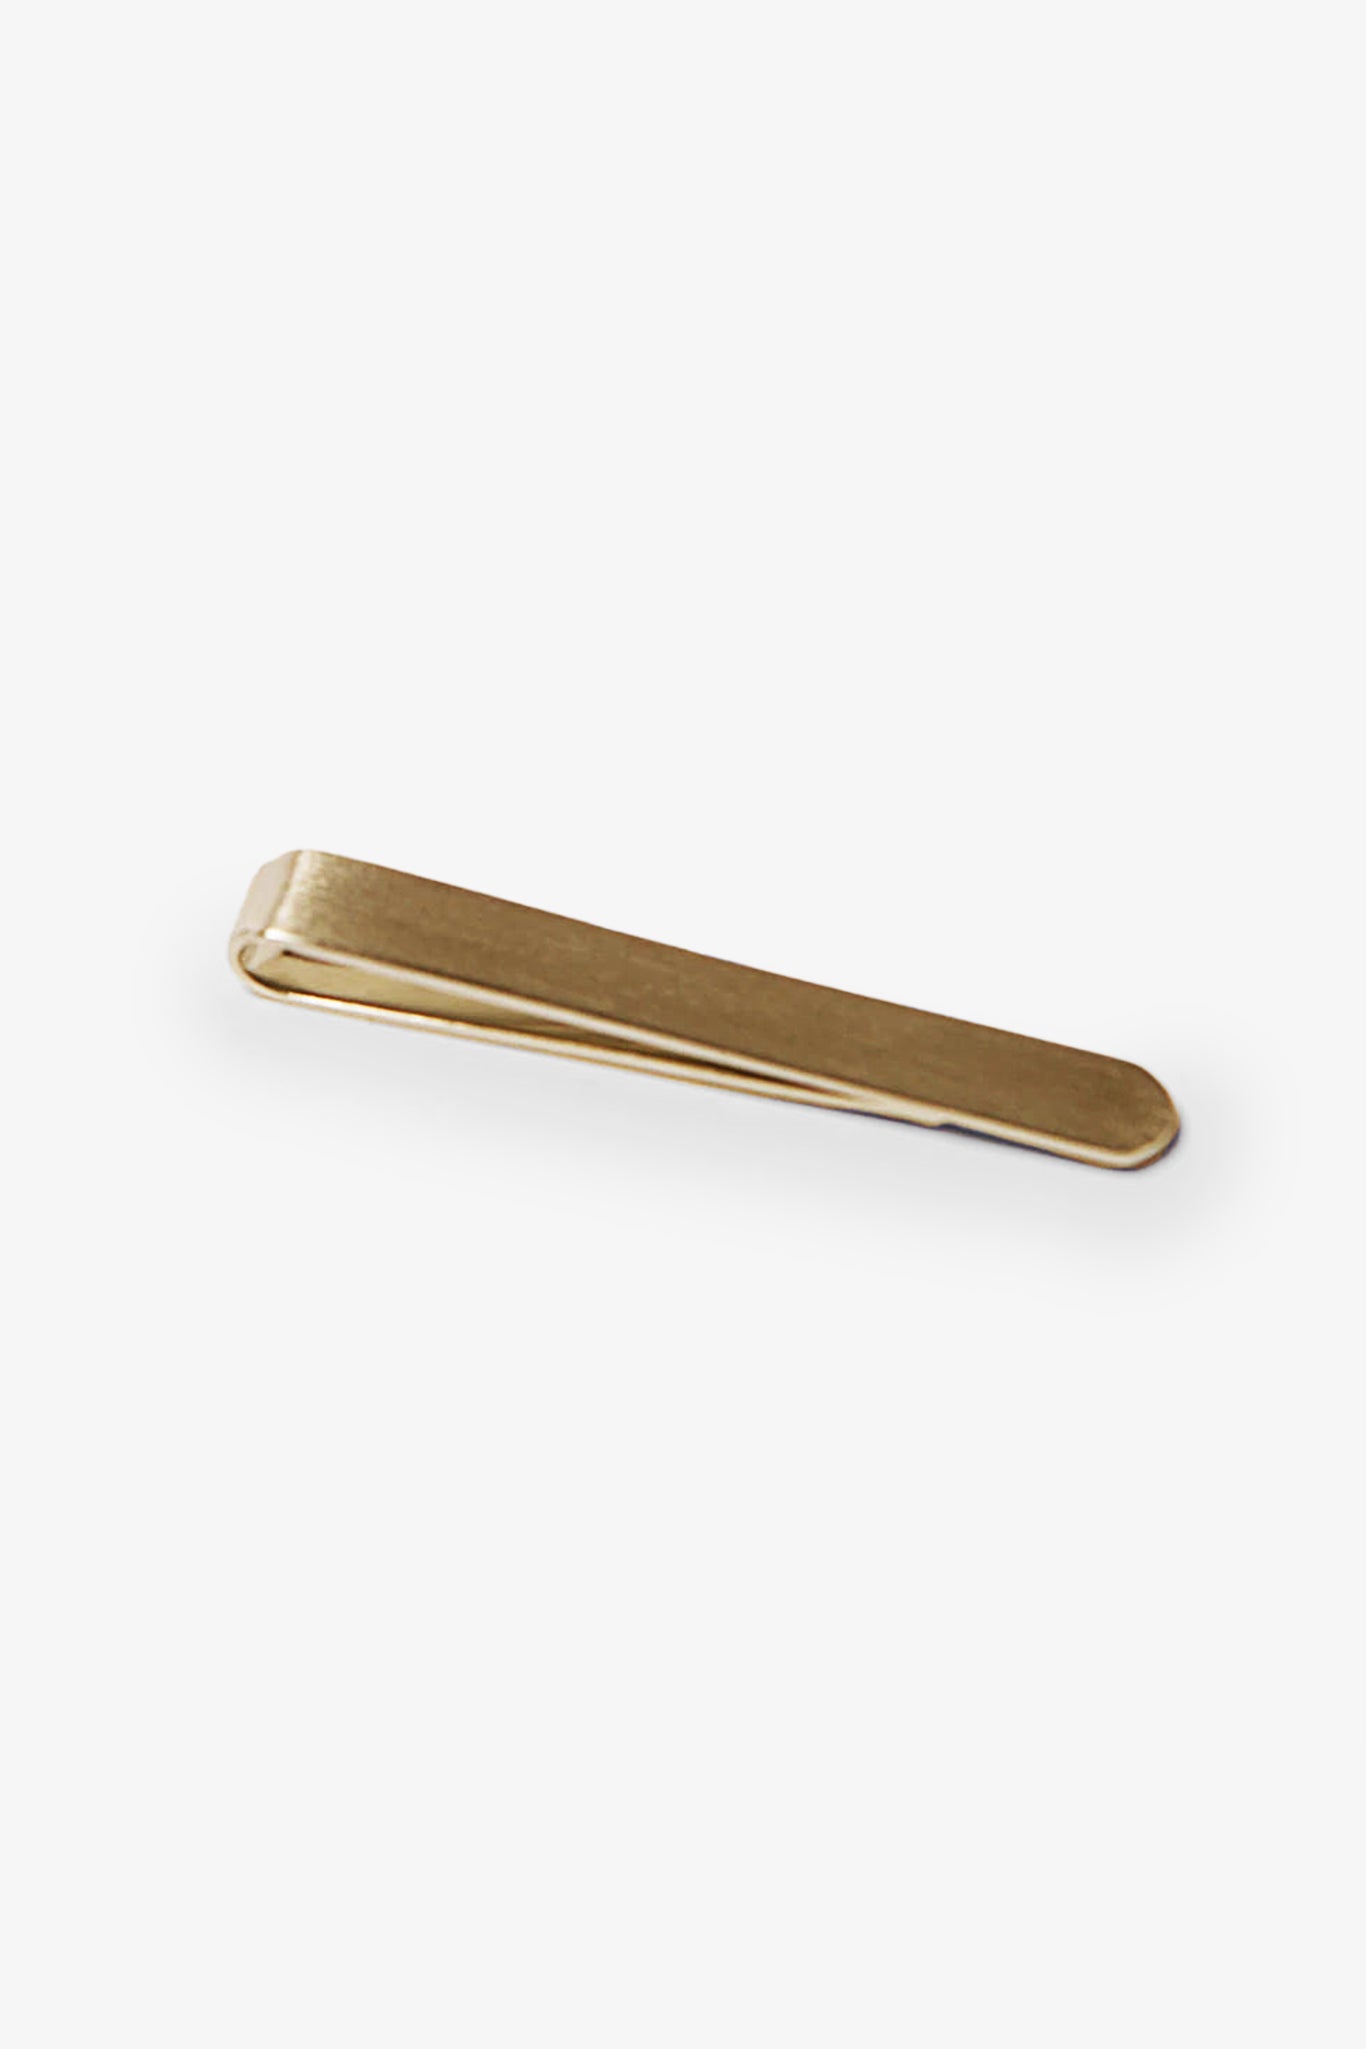 Gold Tie Bar by SuitShop, front view